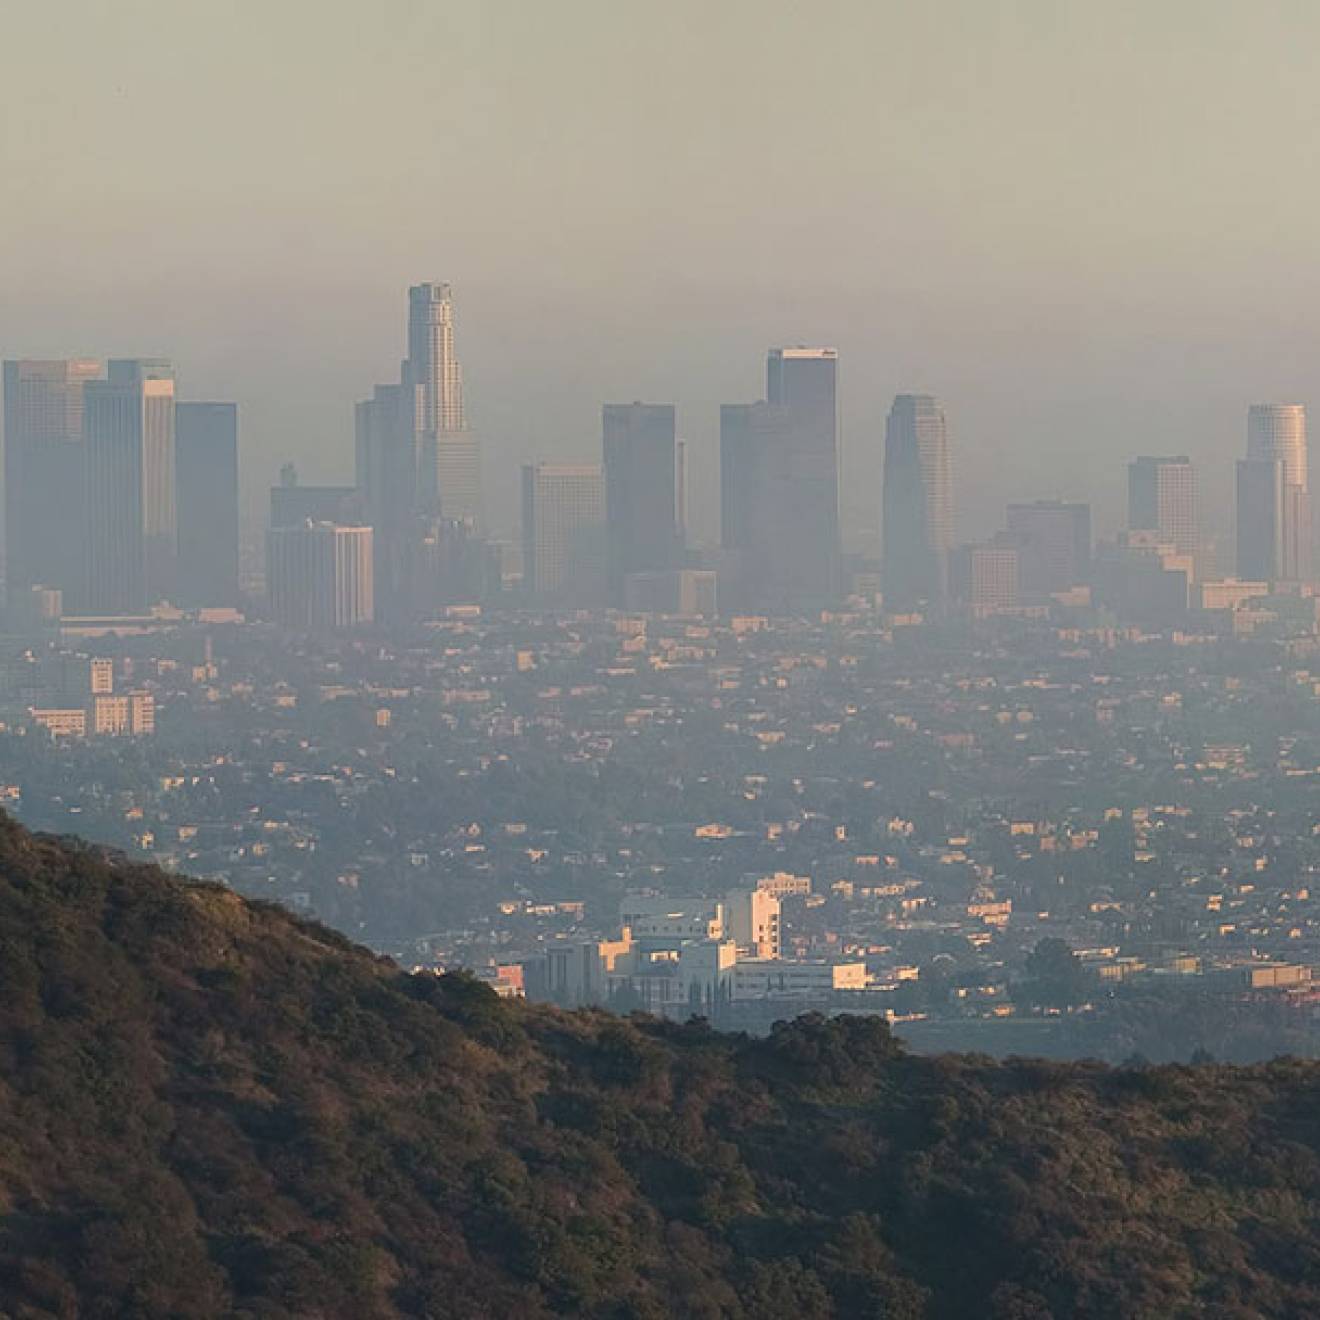 Heavy smog over Los Angeles, as seen from the mountains outside the city.